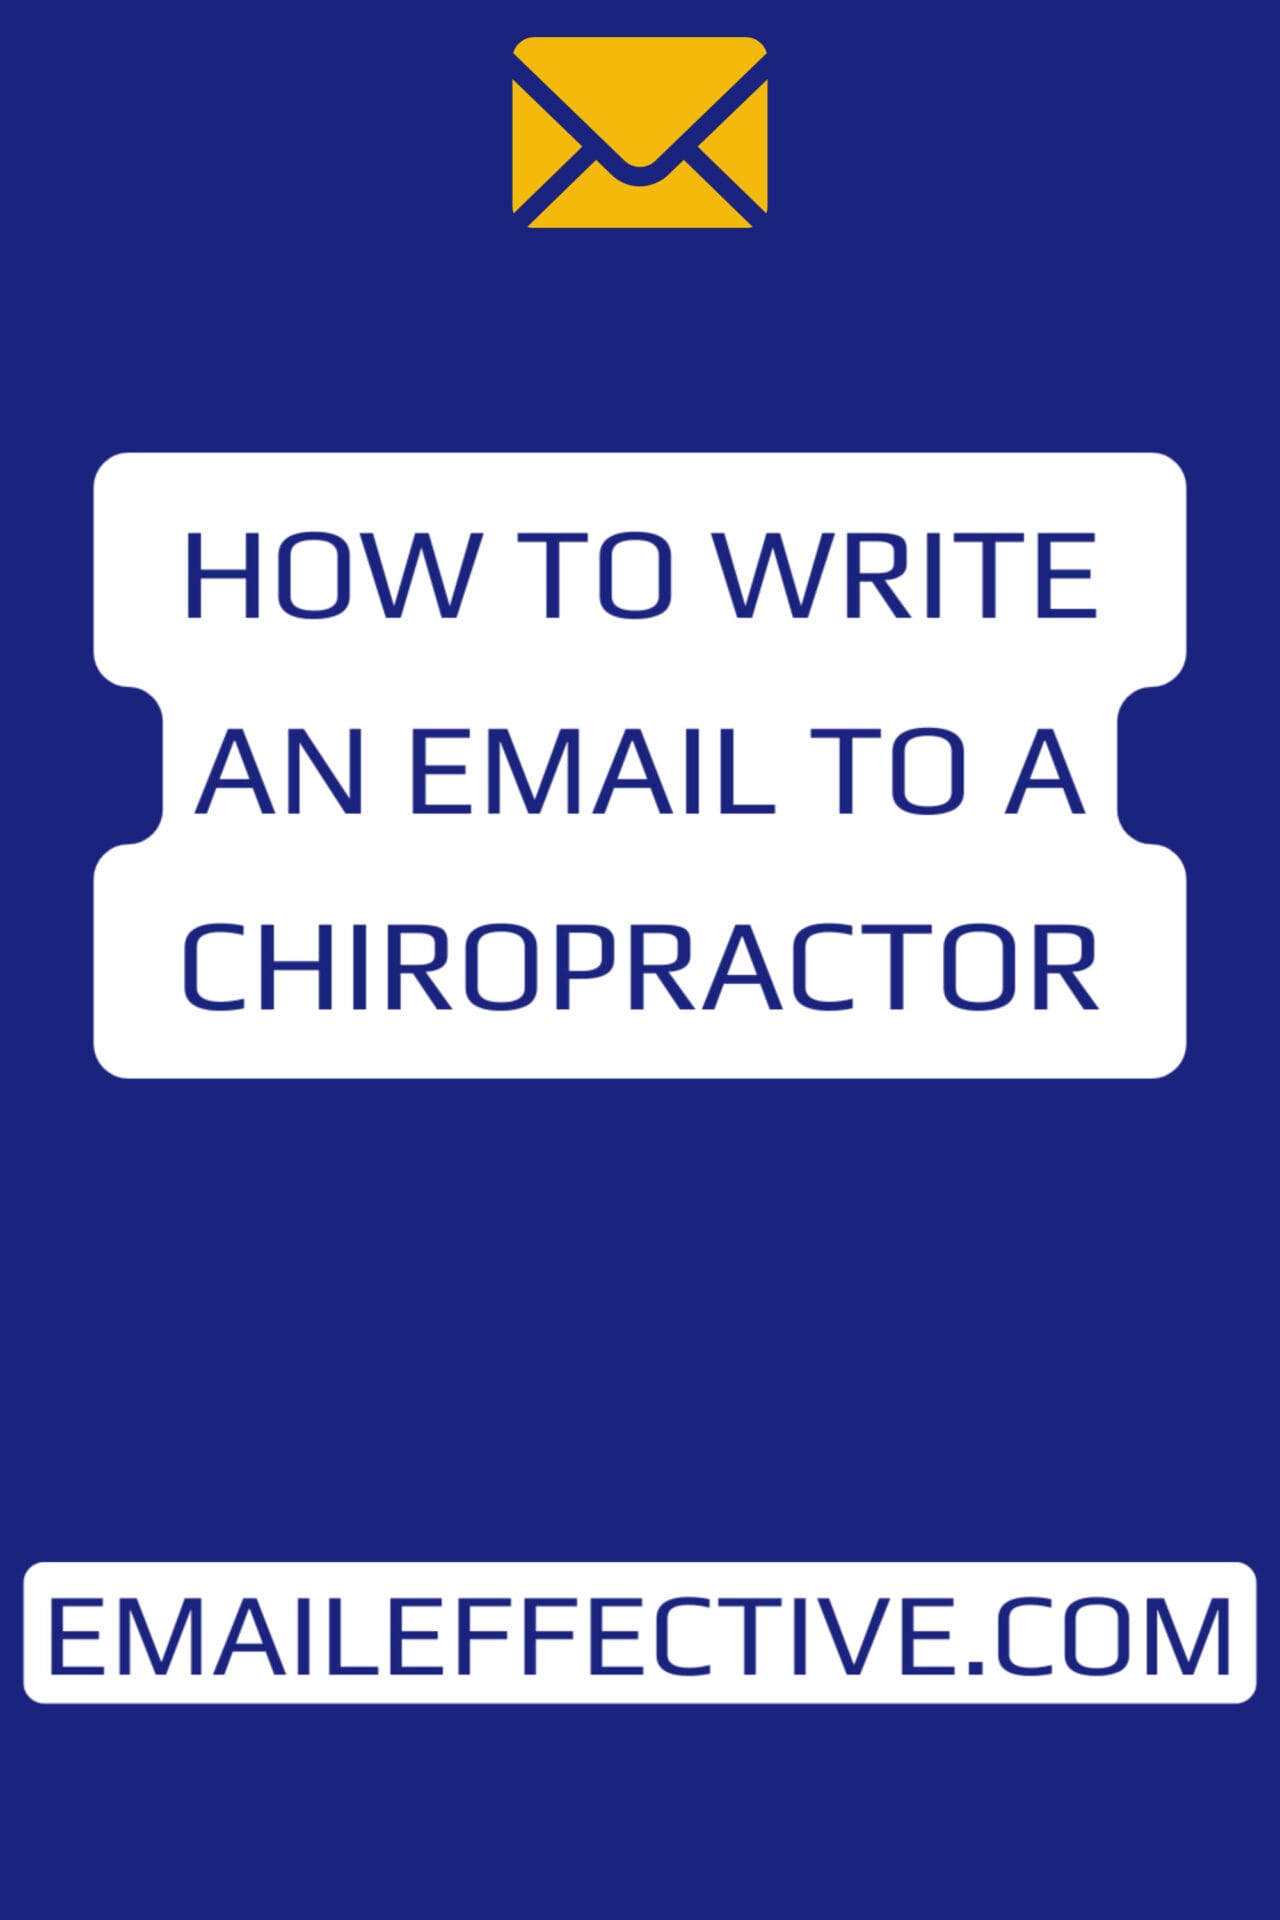 How to Write an Email to A Chiropractor